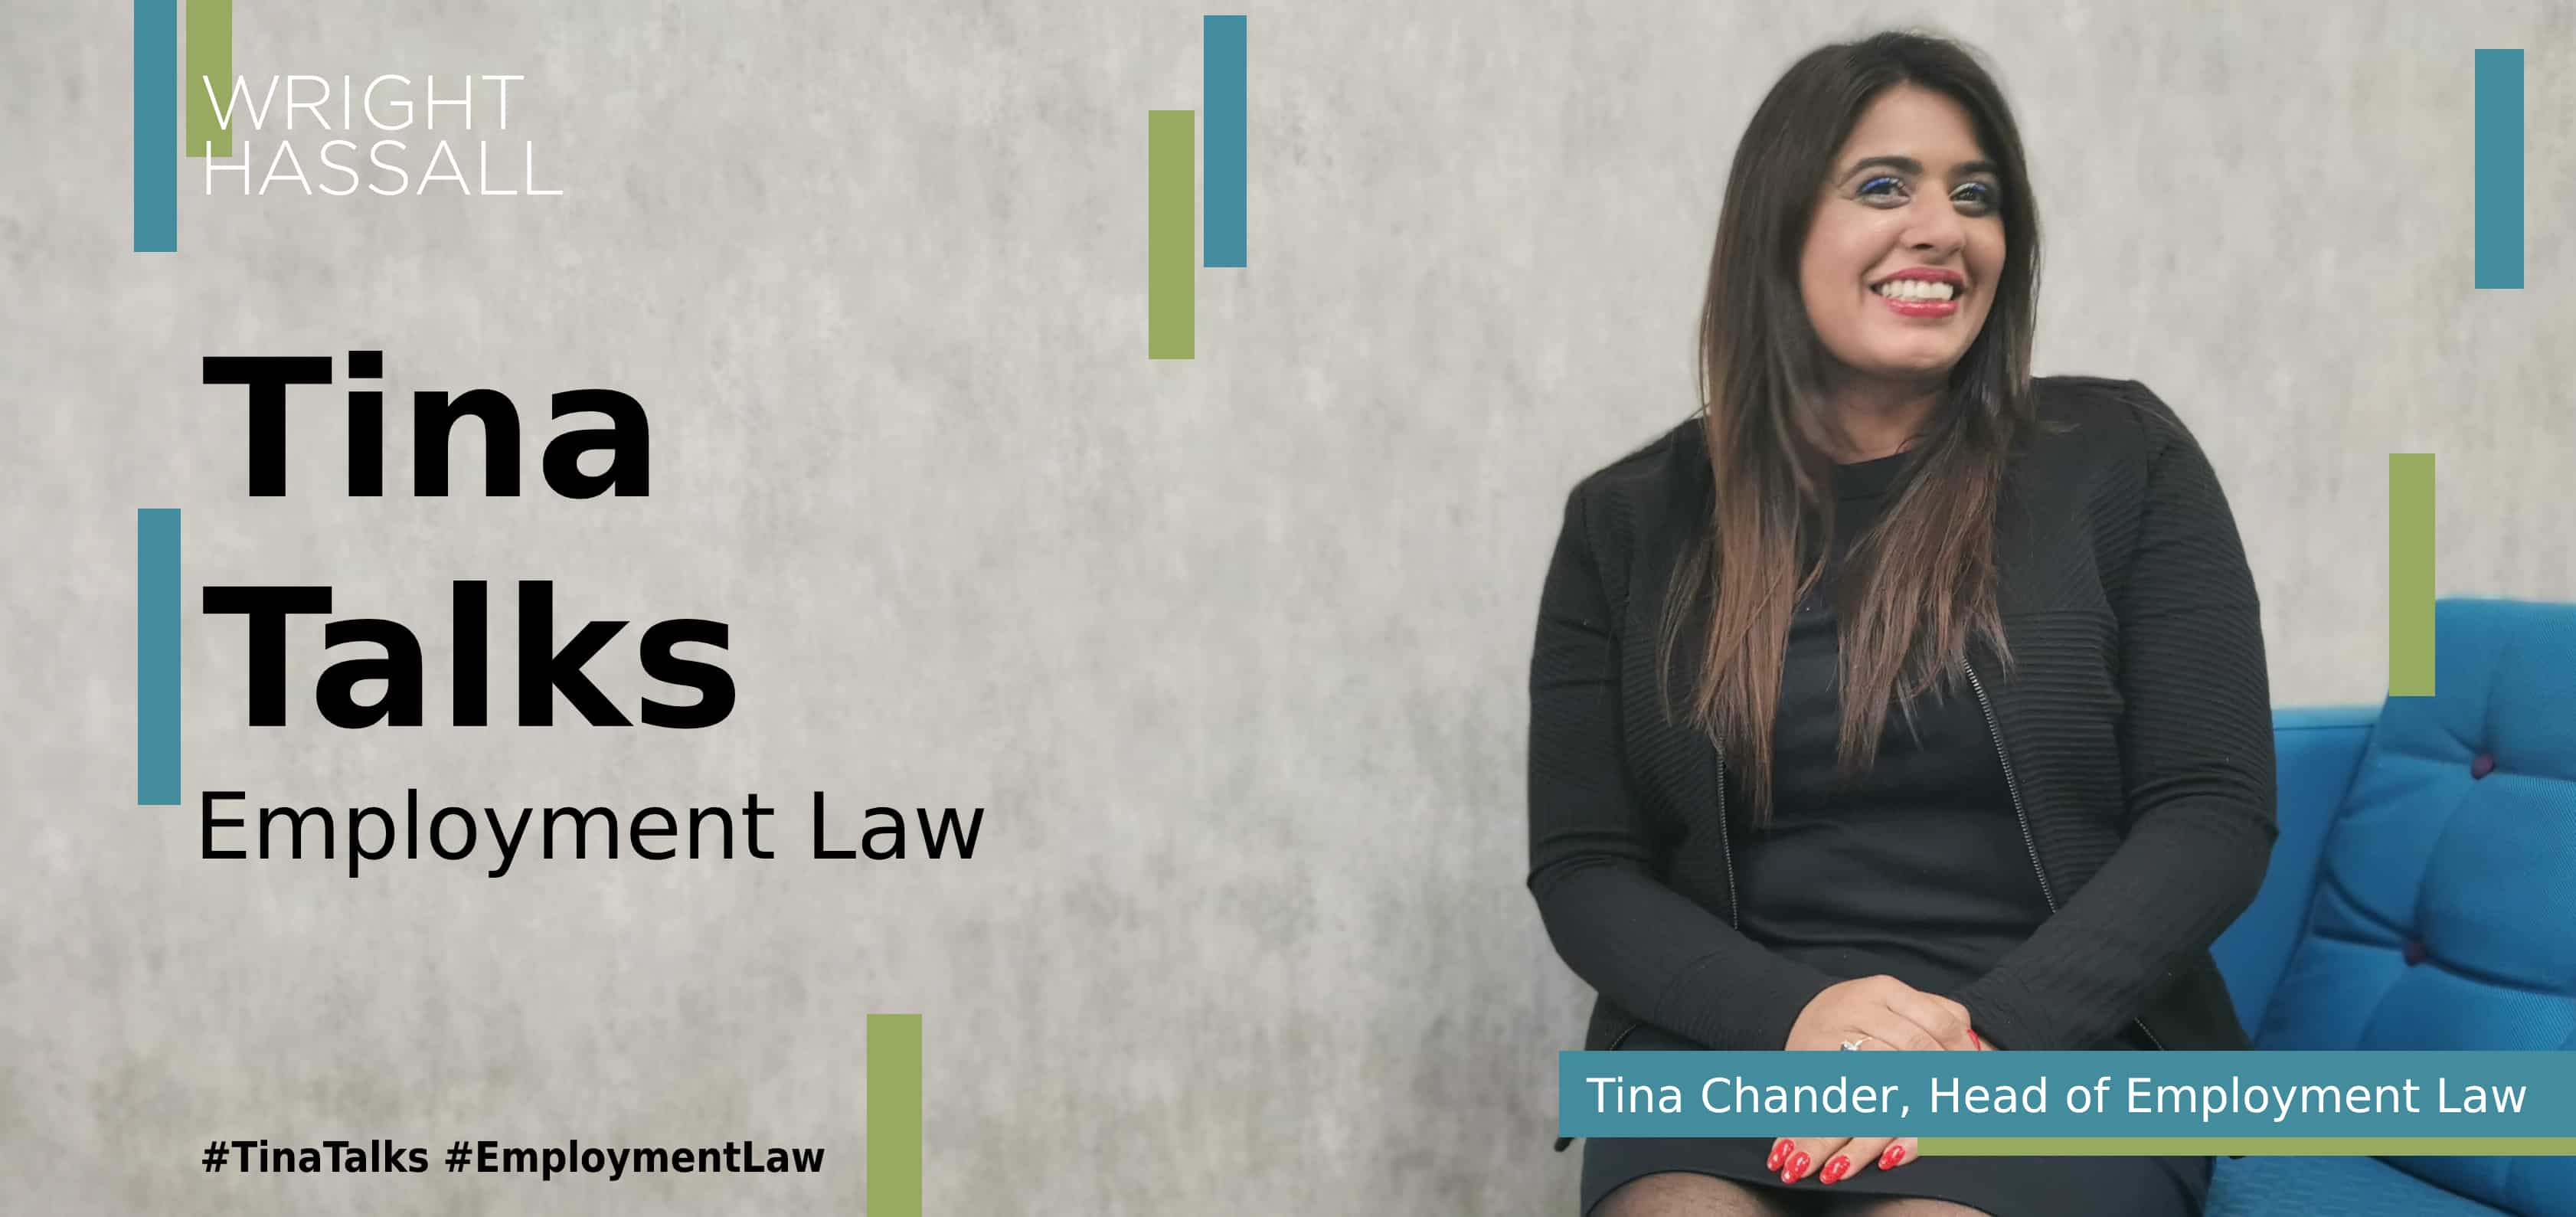 Tina Chander, Employment Lawyer sitting on a couch